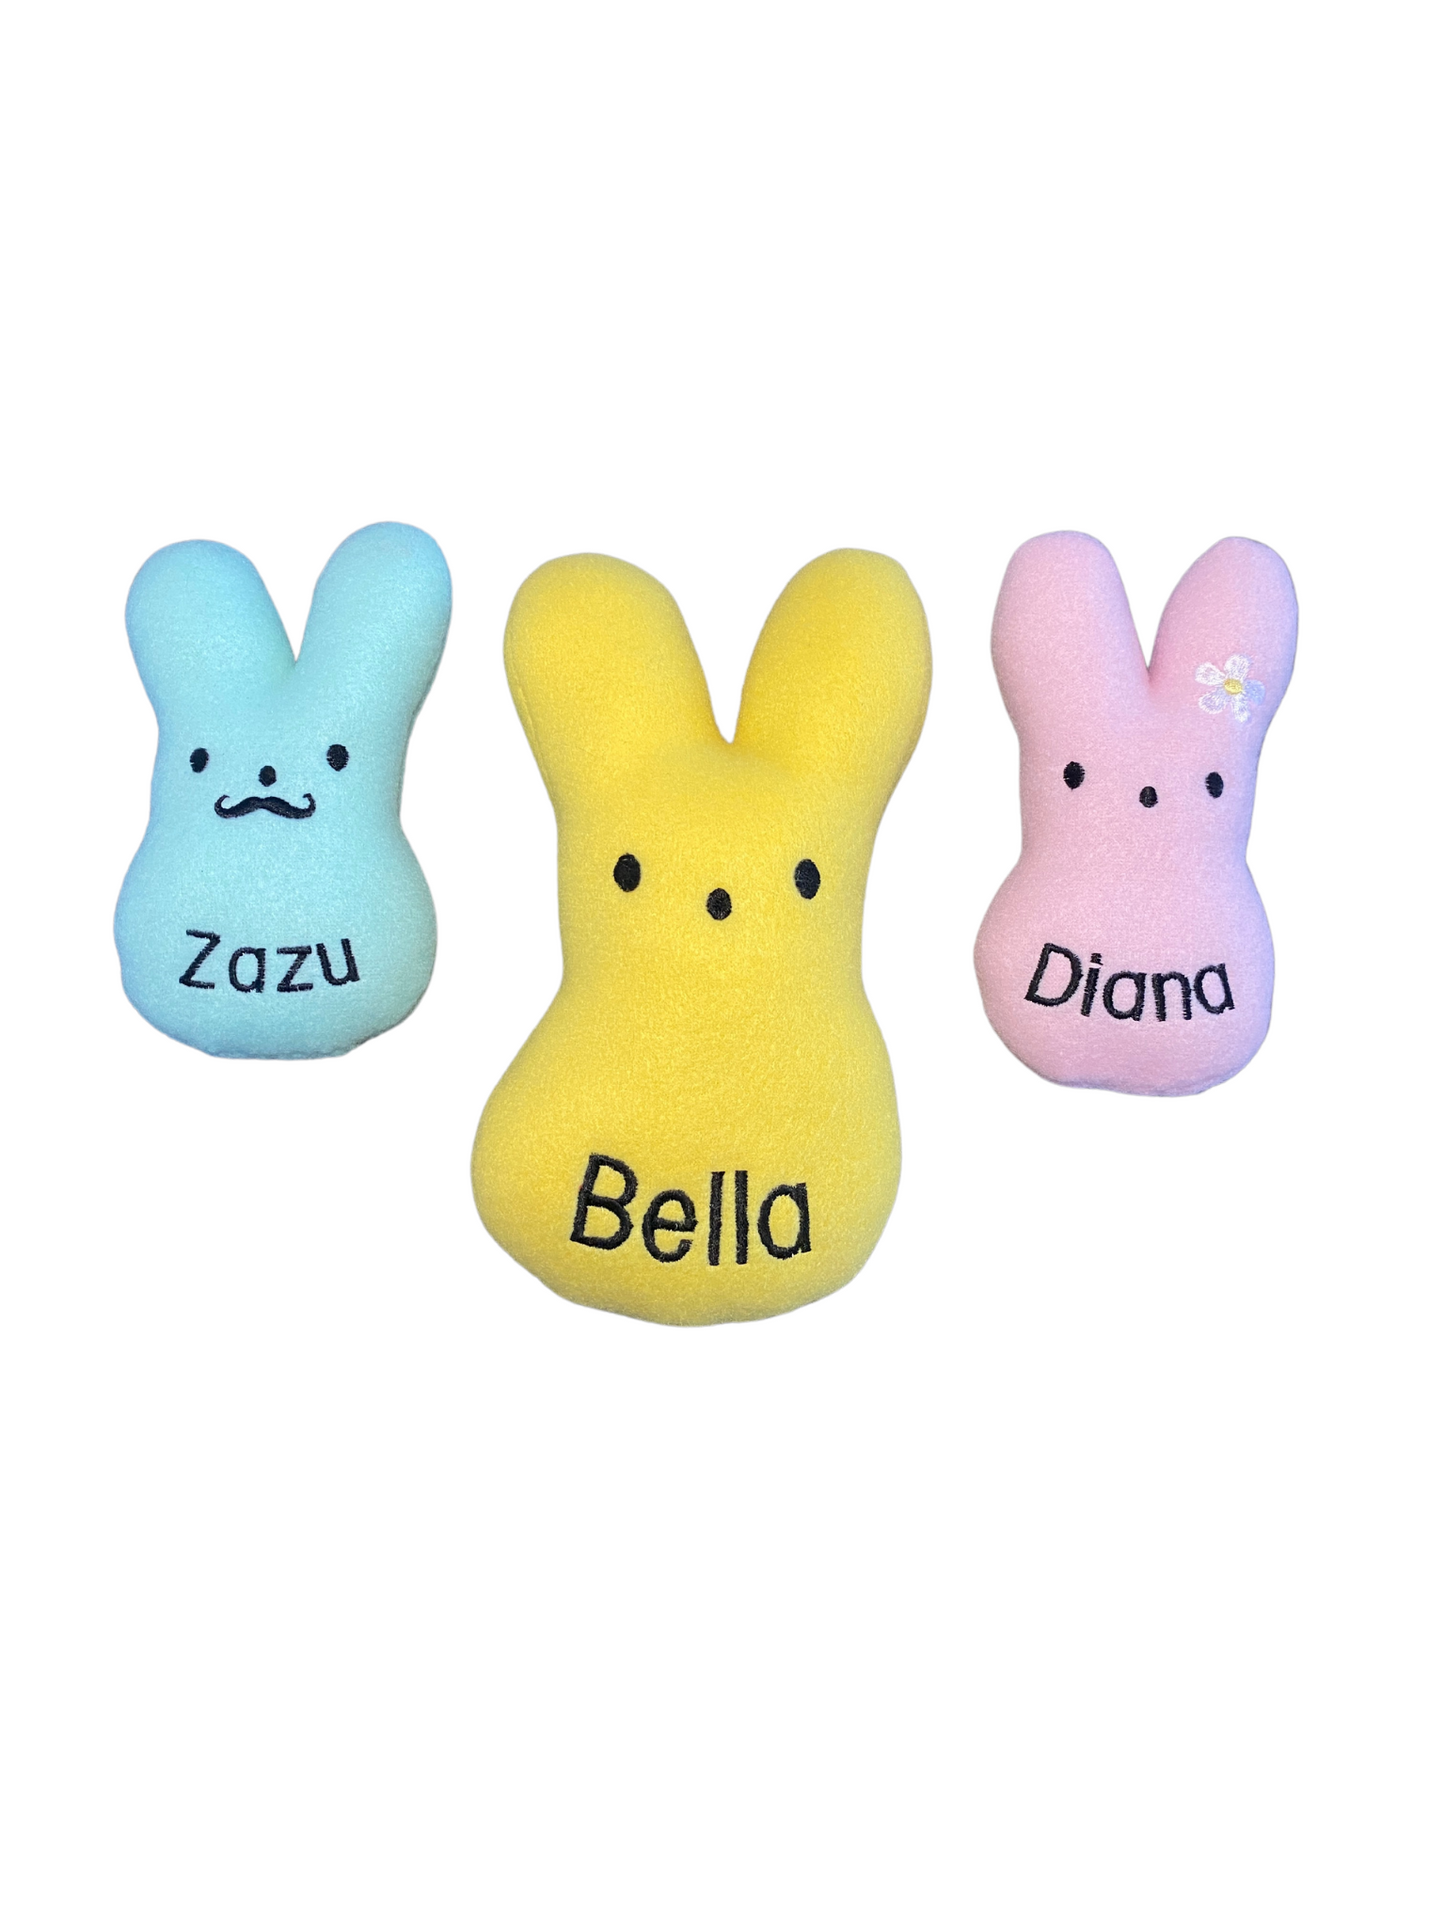 Peep Bunny Custom Dog Toy- Personalized Easter Squeaky Toy Dog Toys   